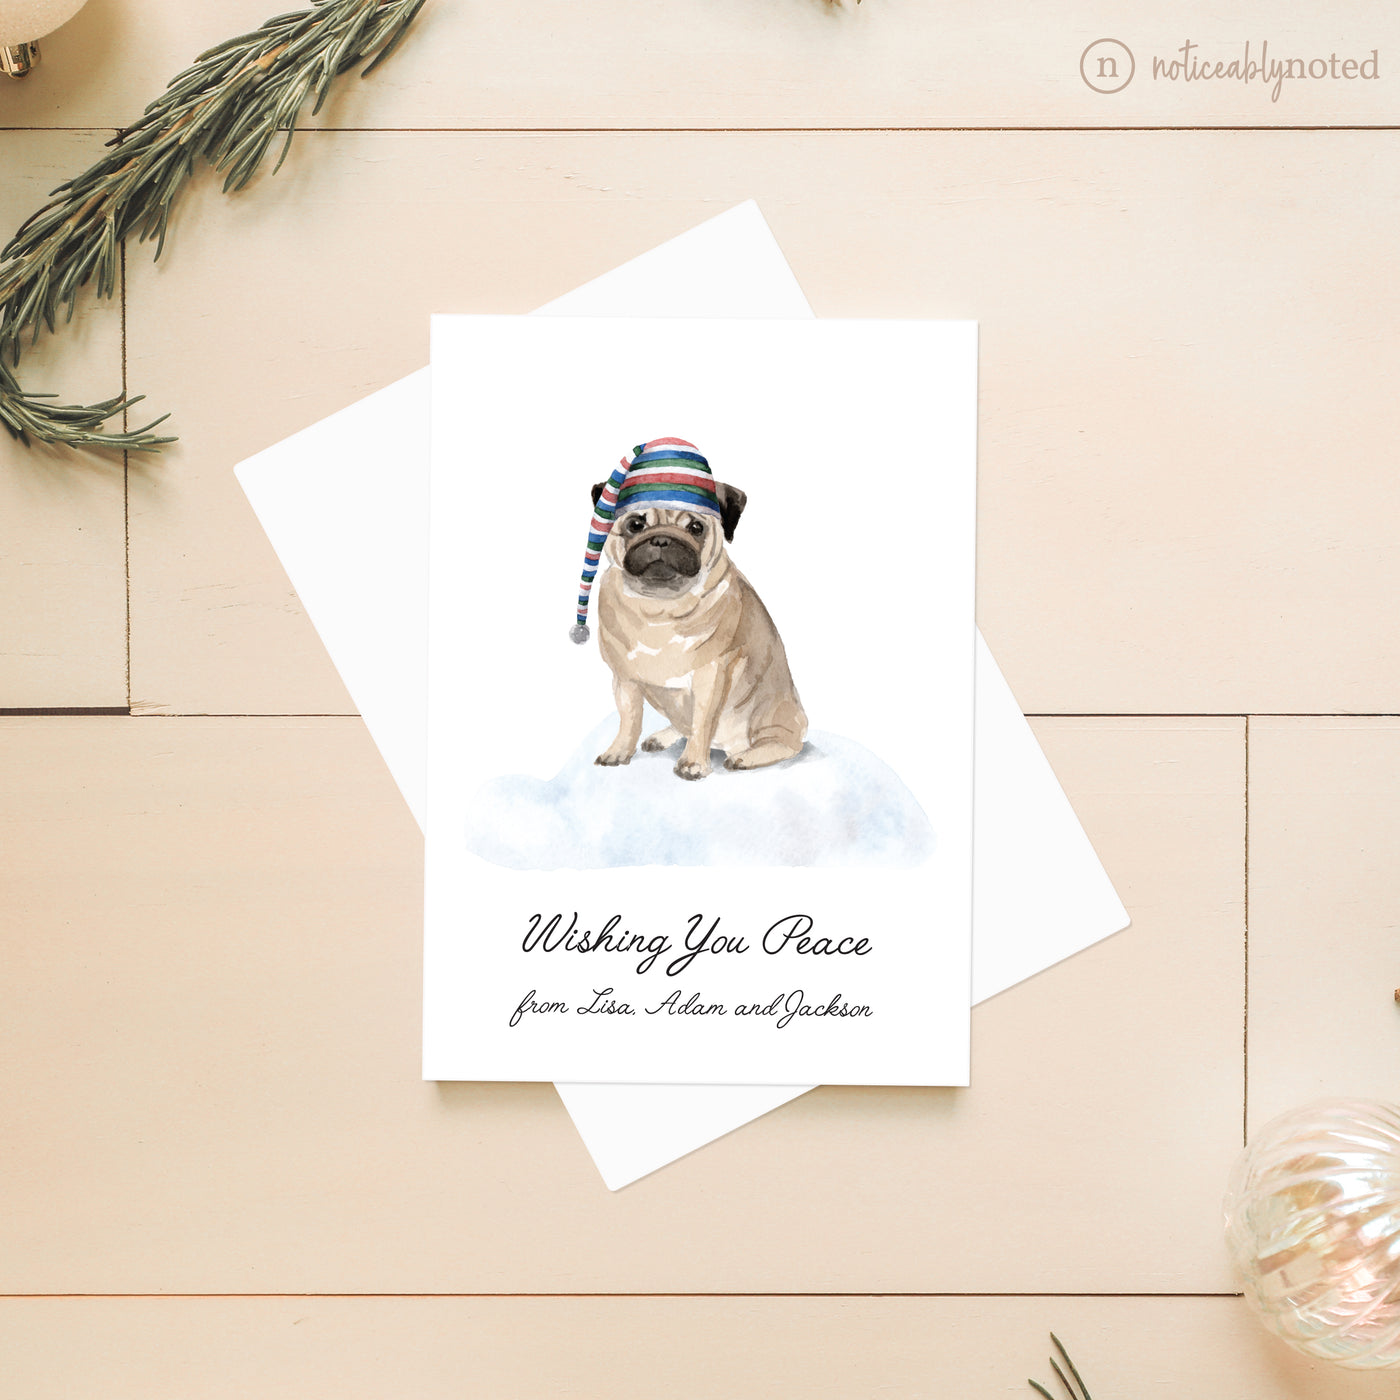 Pug Dog Christmas Cards | Noticeably Noted